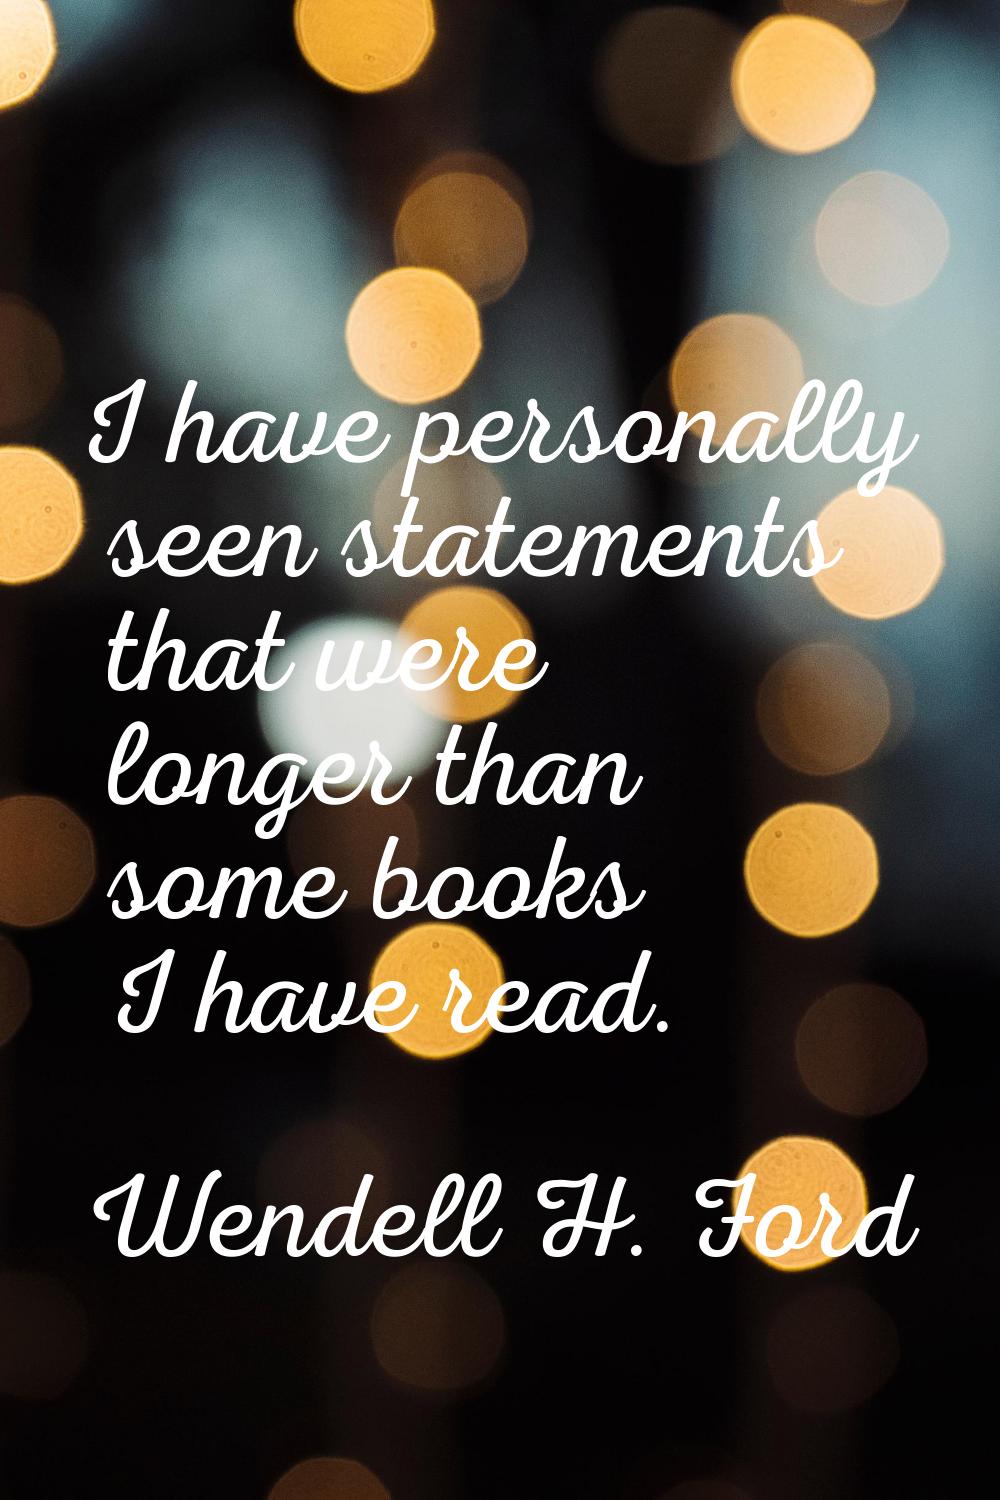 I have personally seen statements that were longer than some books I have read.